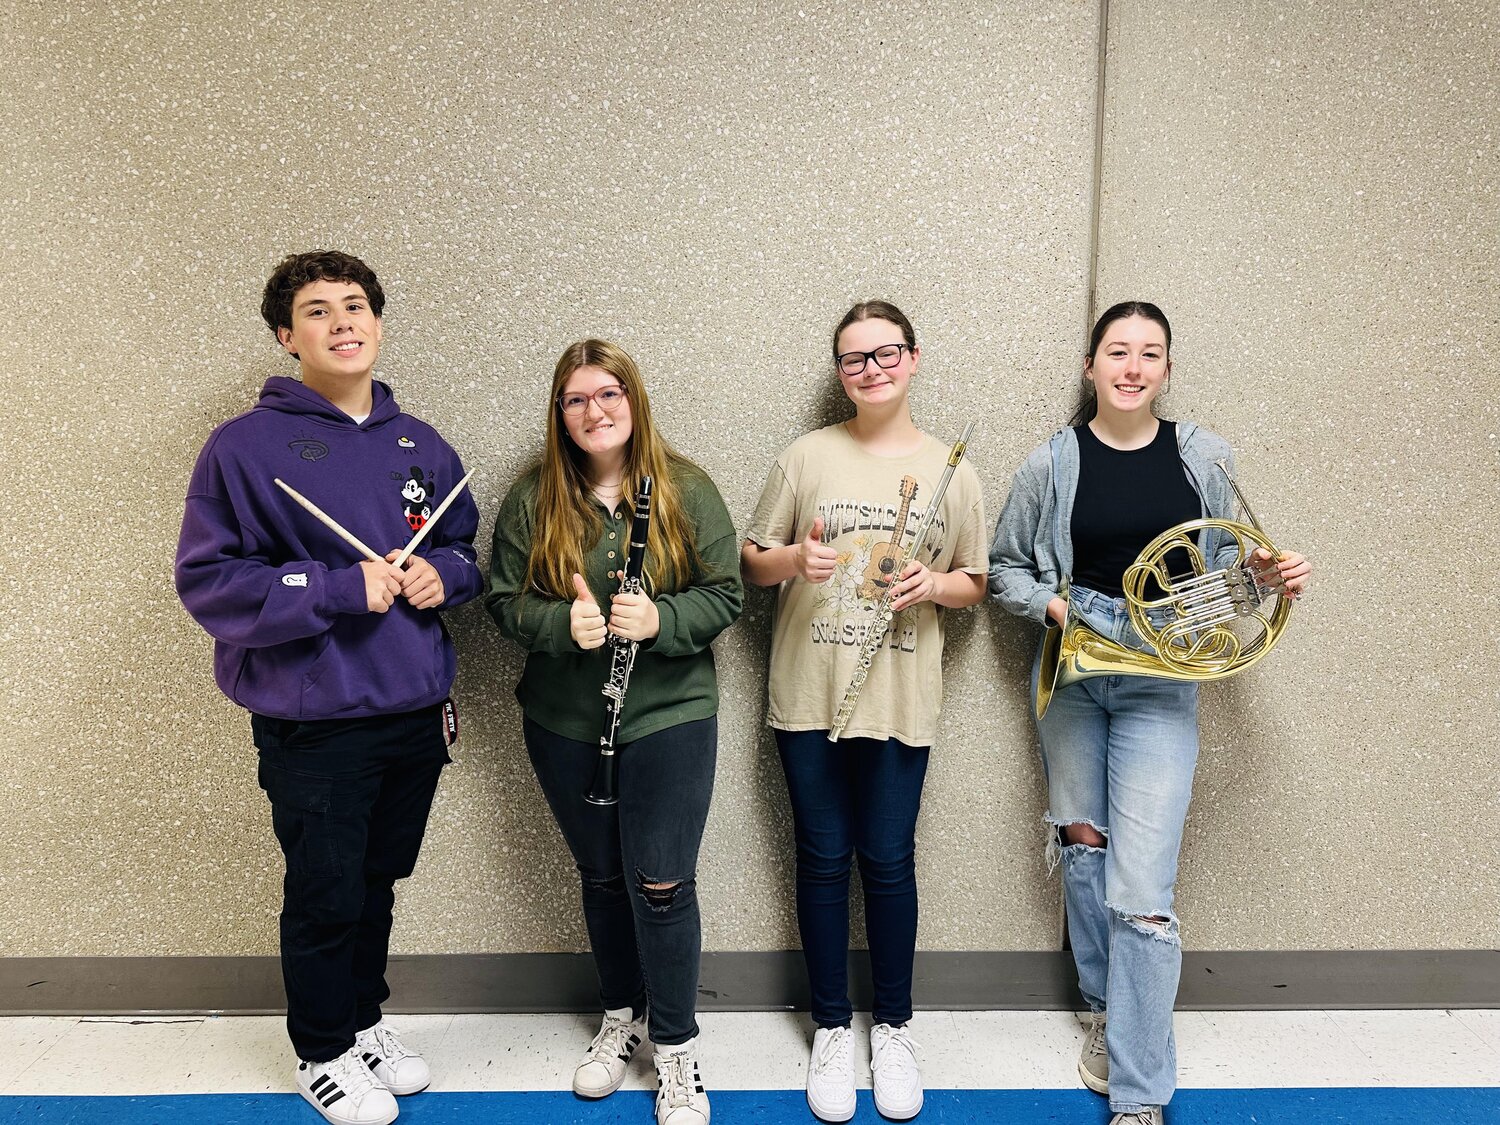 Congratulations to these outstanding CHS Band students who auditioned and were selected to be a part of one of the West Central MMEA District ensembles! There are 11 music districts in the state of Missouri and the West Central District consists of around 35 schools. Over 450 students auditioned for one of the bands and four students from Clinton made a spot! (Left to Right) Congratulations to Sam Baughman -1st Alternate Jazz Drum Set, Allie Vandenberg - 9th Chair Clarinet Honorable Mention Band, Savannah Lee - 8th Chair Flute Honorable Mention Band, and Alex Markham - 1st Chair Horn Honorable Mention Band. Because of Sam’s ranking, he gets the opportunity to audition for the State Jazz Band in December! Great job!”